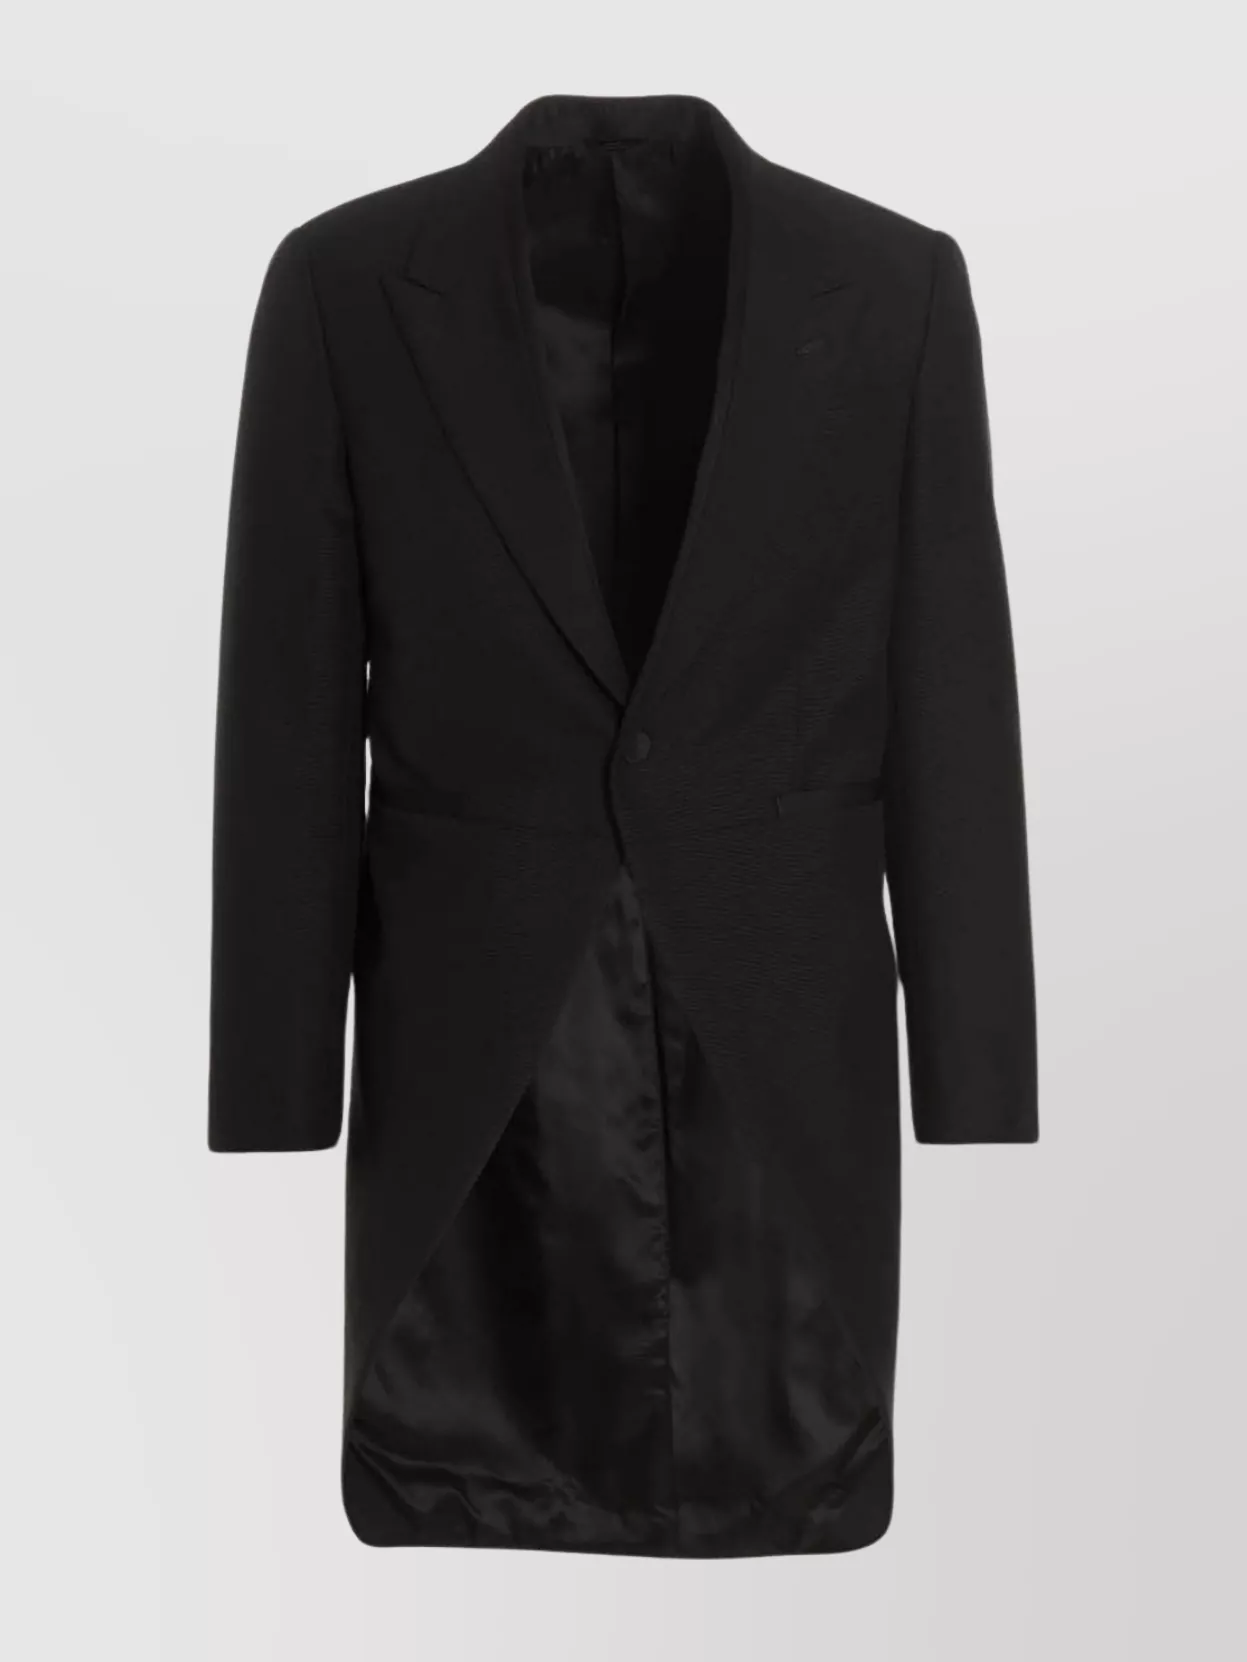 Fendi Tailored Fit Mohair Wool Suit